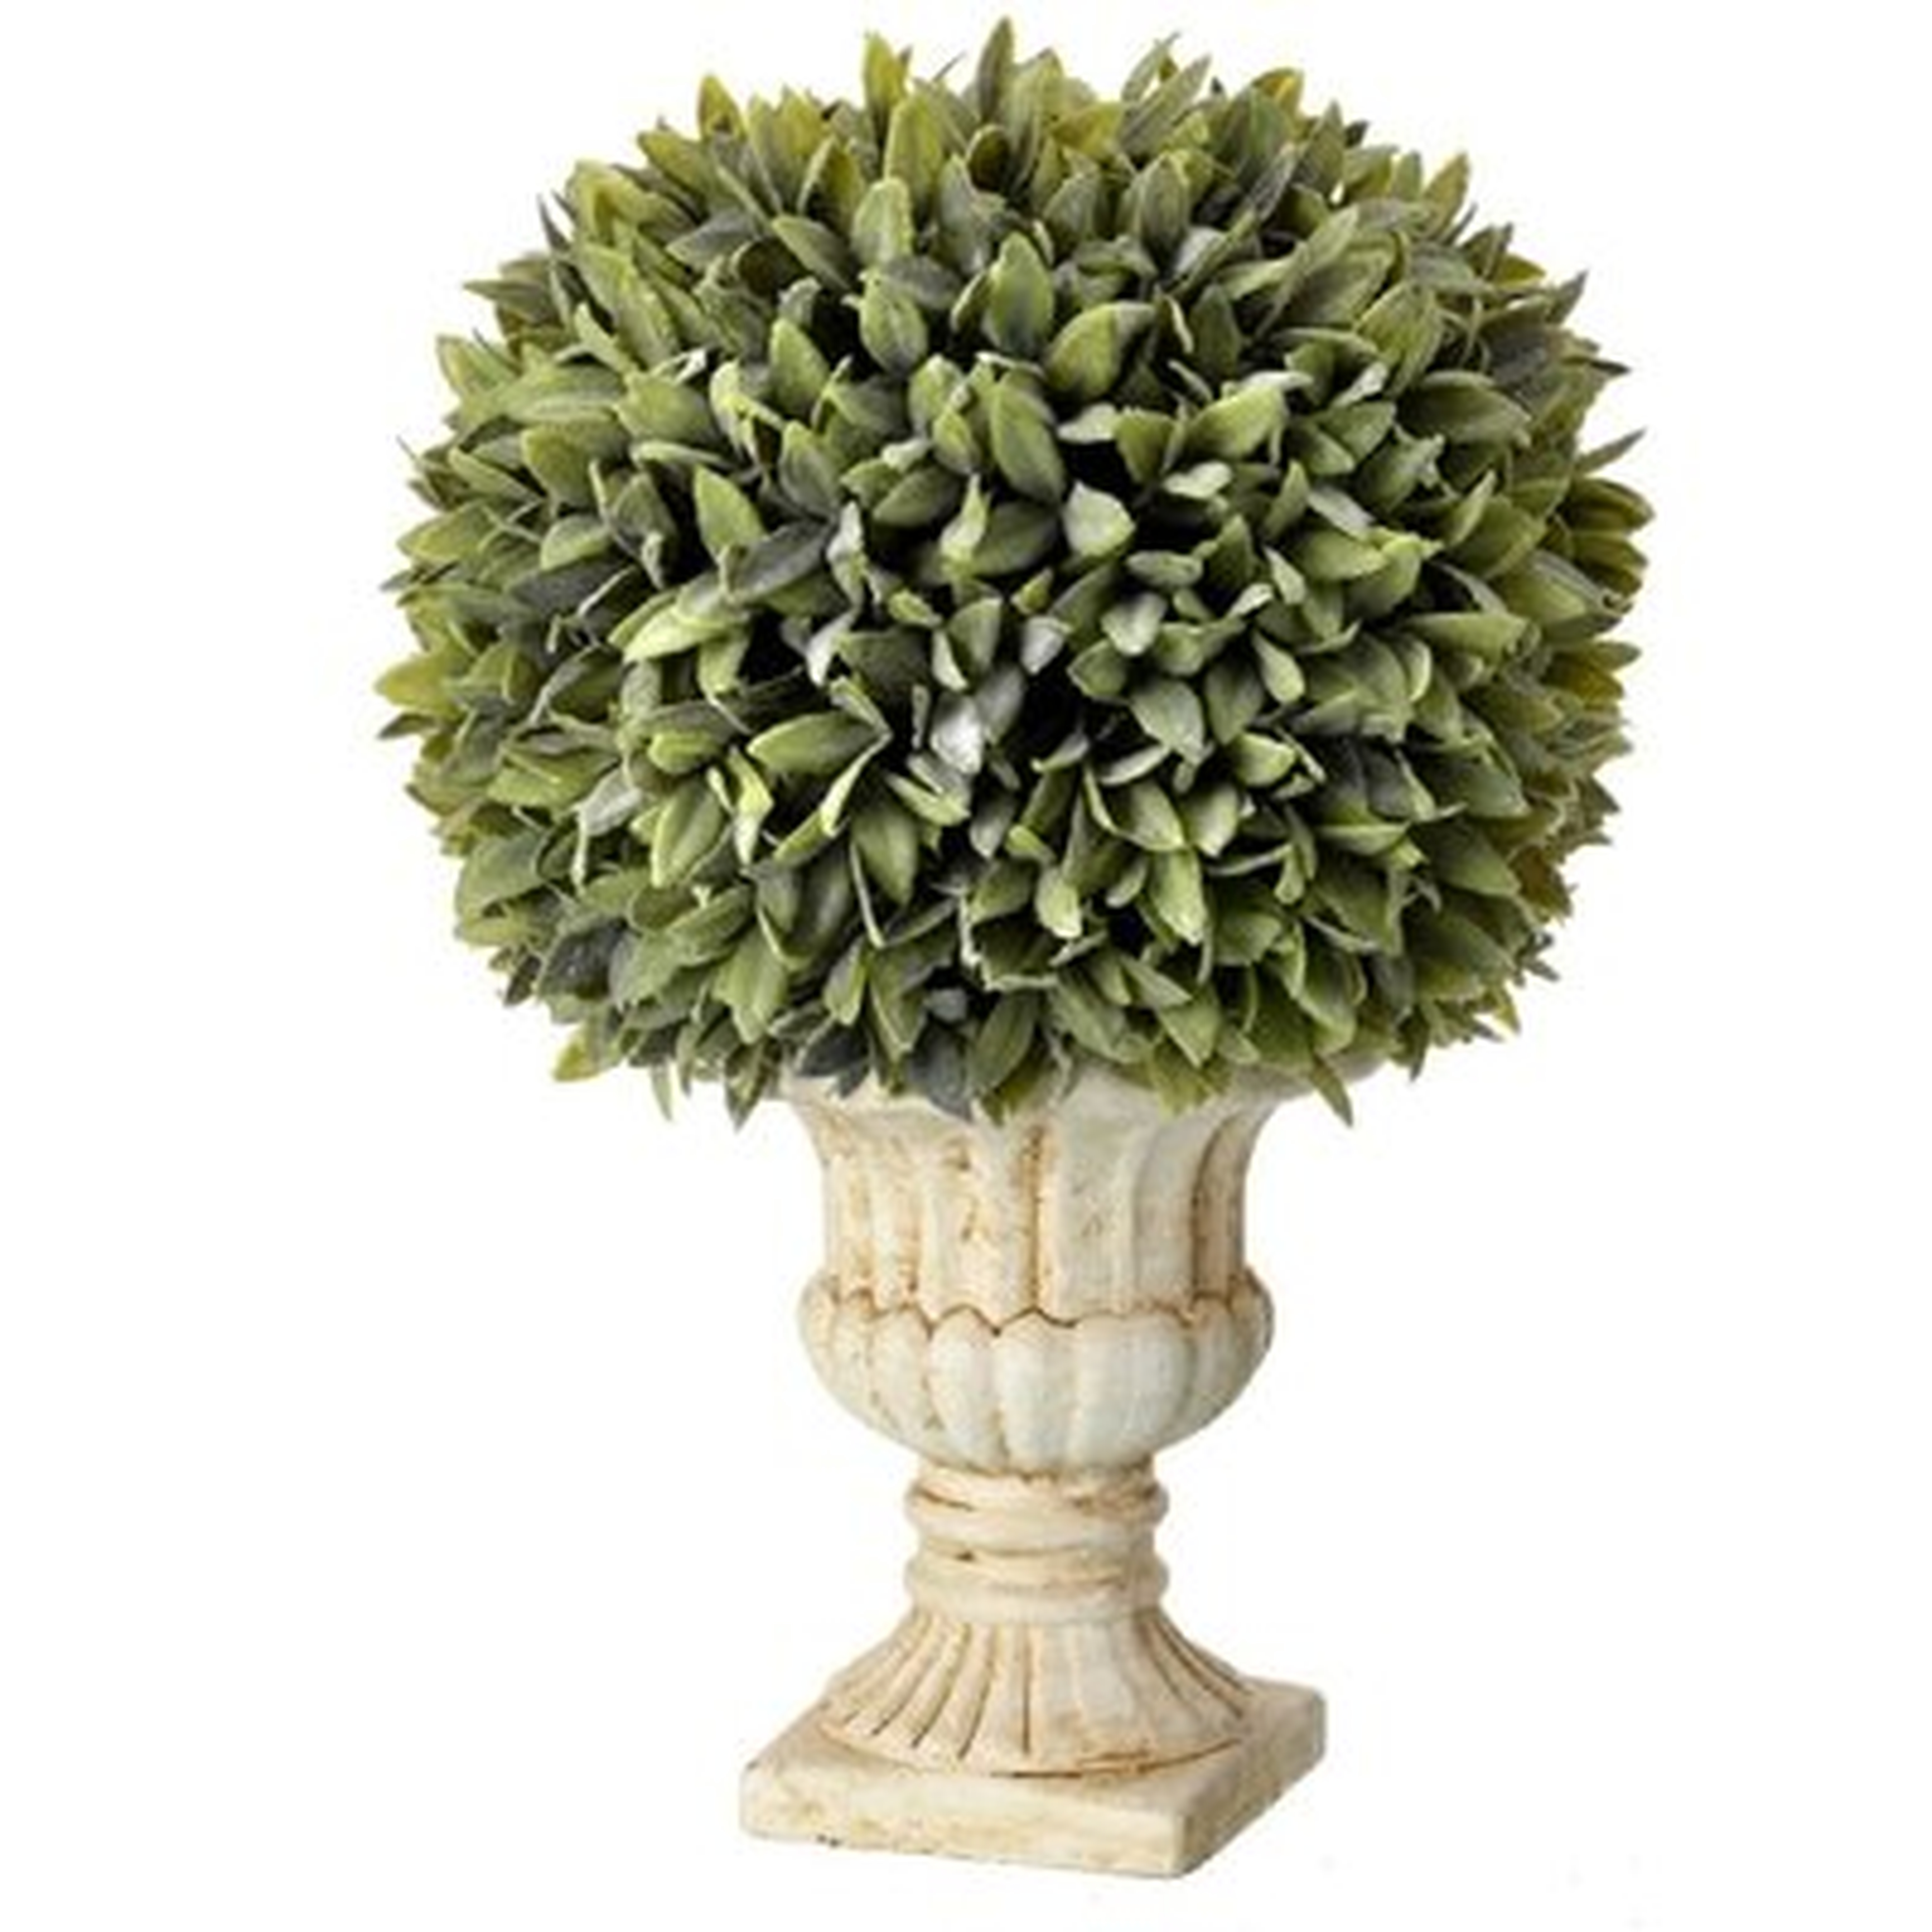 Regency Potted Flocked Sage Ball Foliage Topiary in Urn - Wayfair